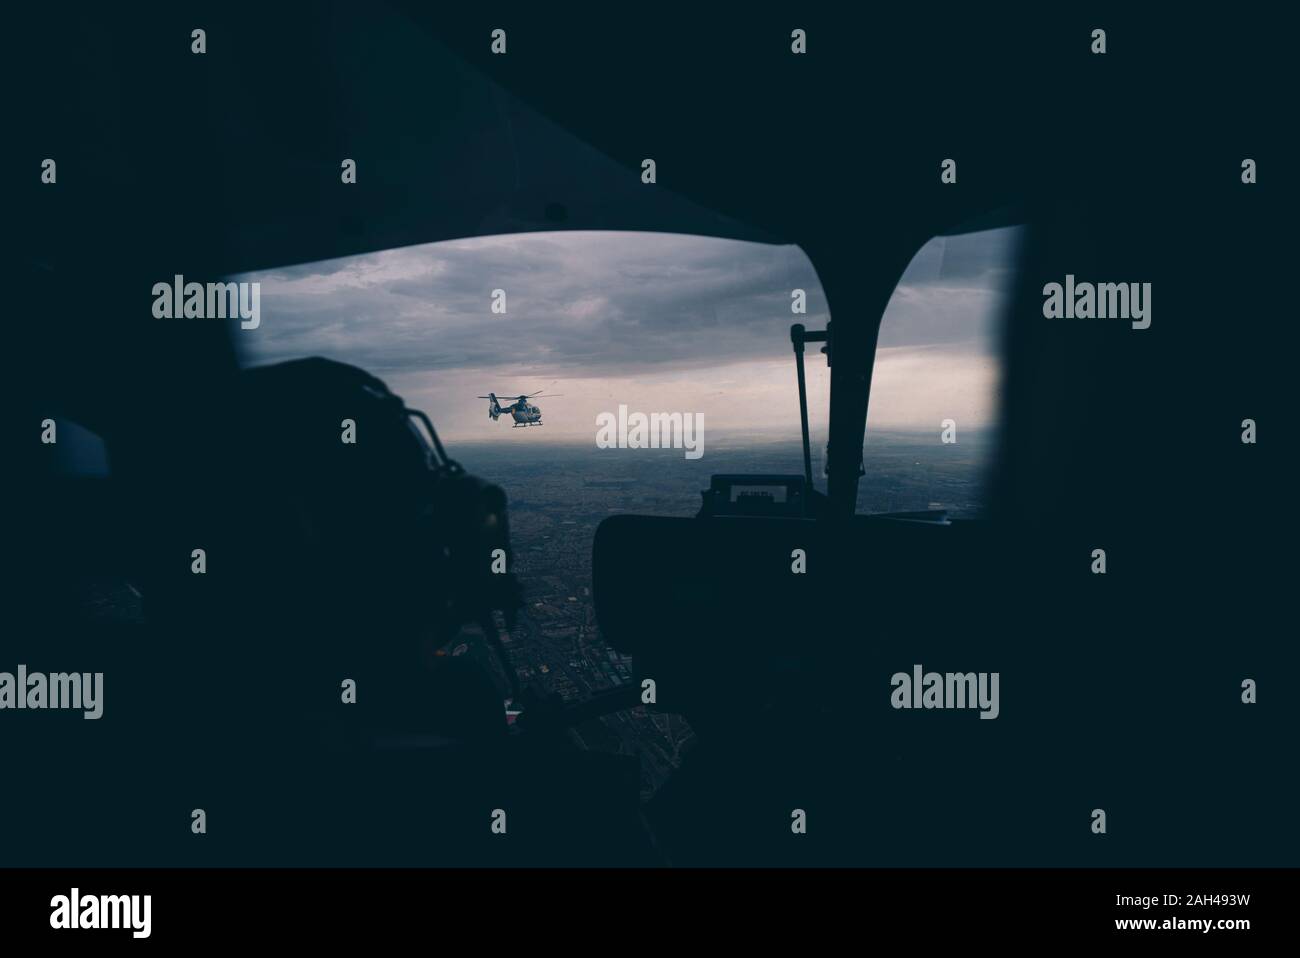 Spain, Madrid, Police helicopters seen from inside cabin Stock Photo